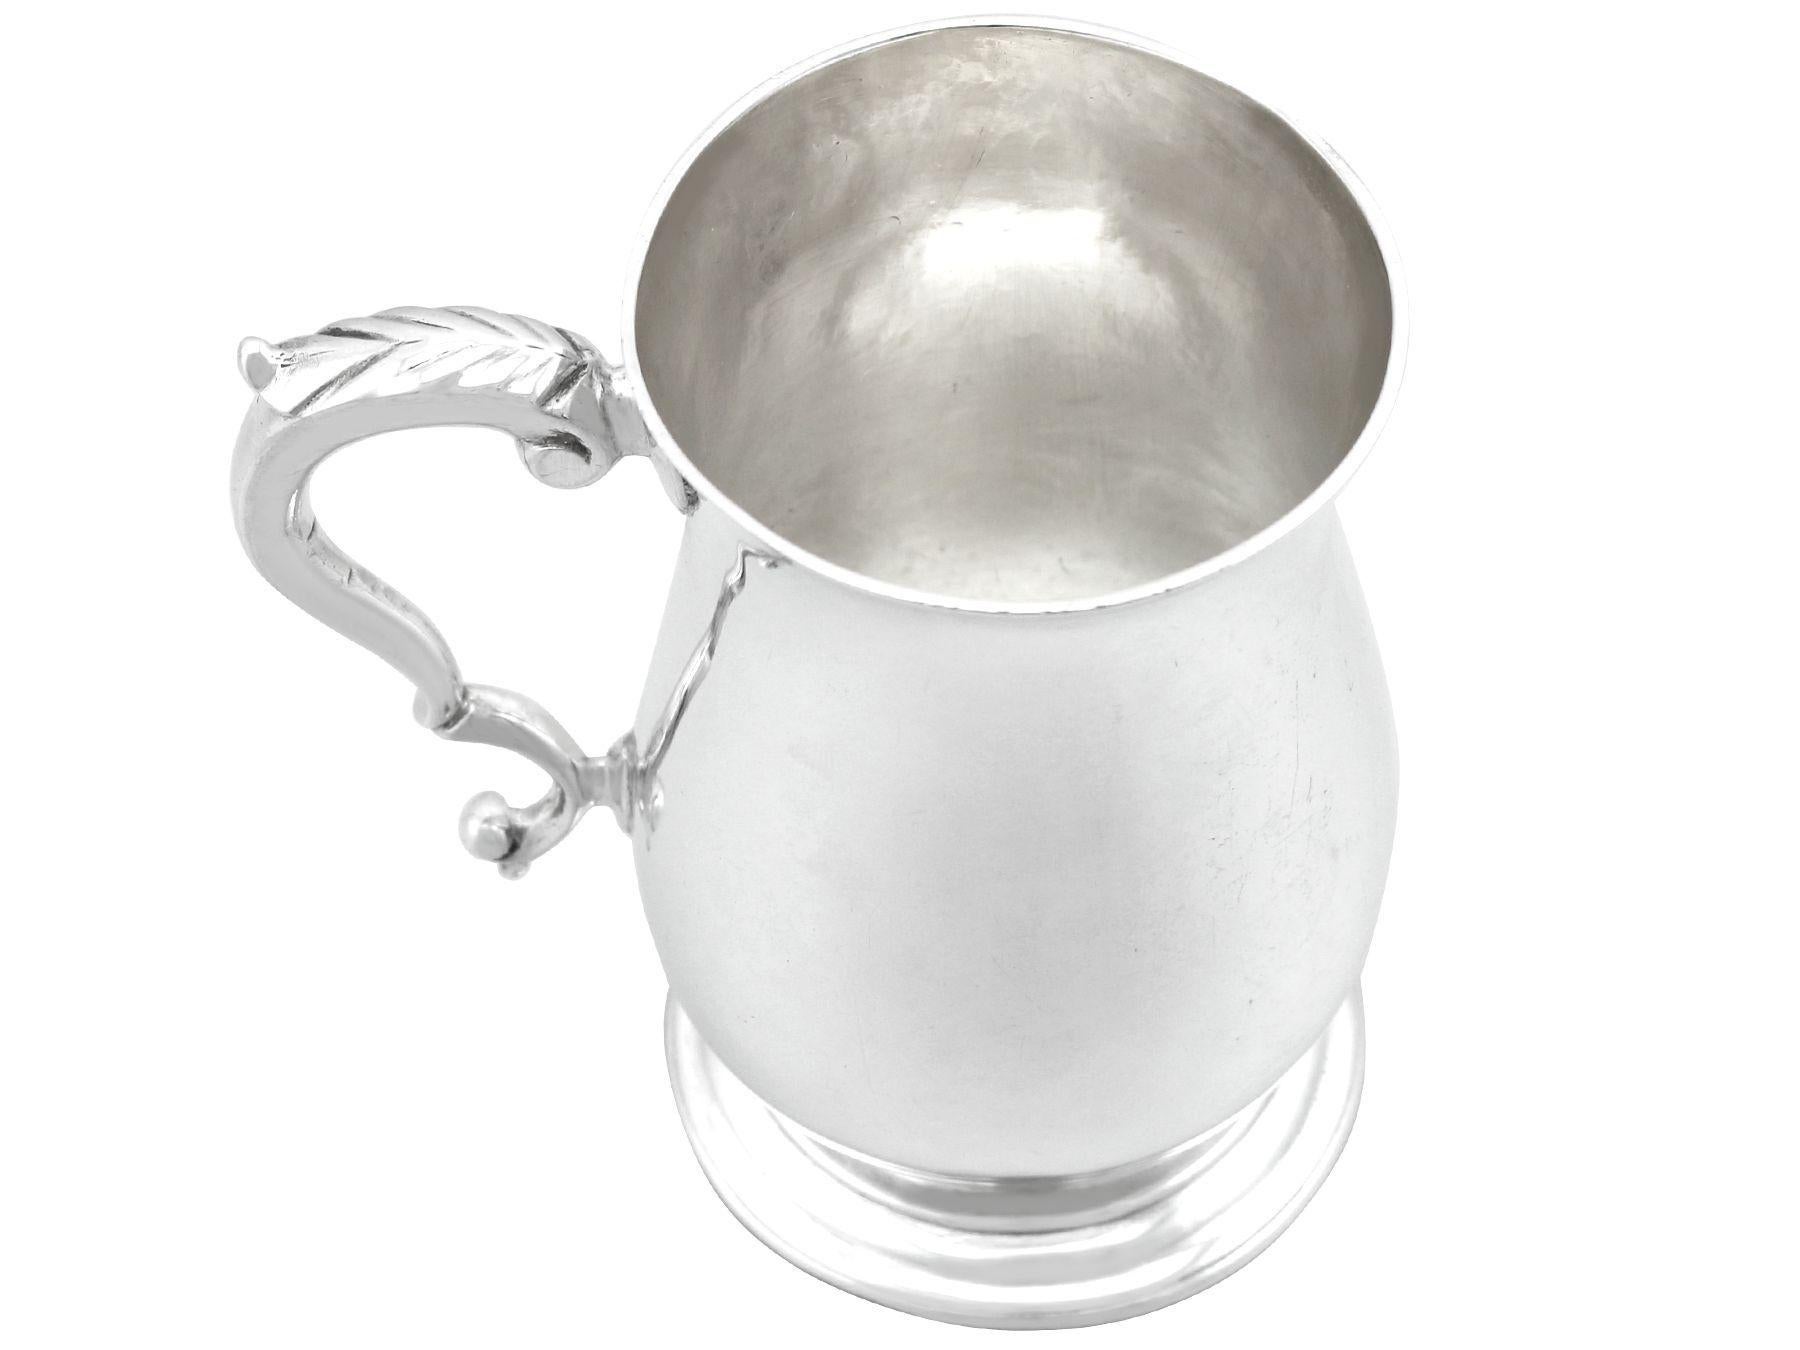 An exceptional, fine and impressive antique George III English sterling silver lady's mug; an addition to our Georgian silverware collection.

This exceptional antique George III sterling silver mug has a plain baluster form onto a circular domed